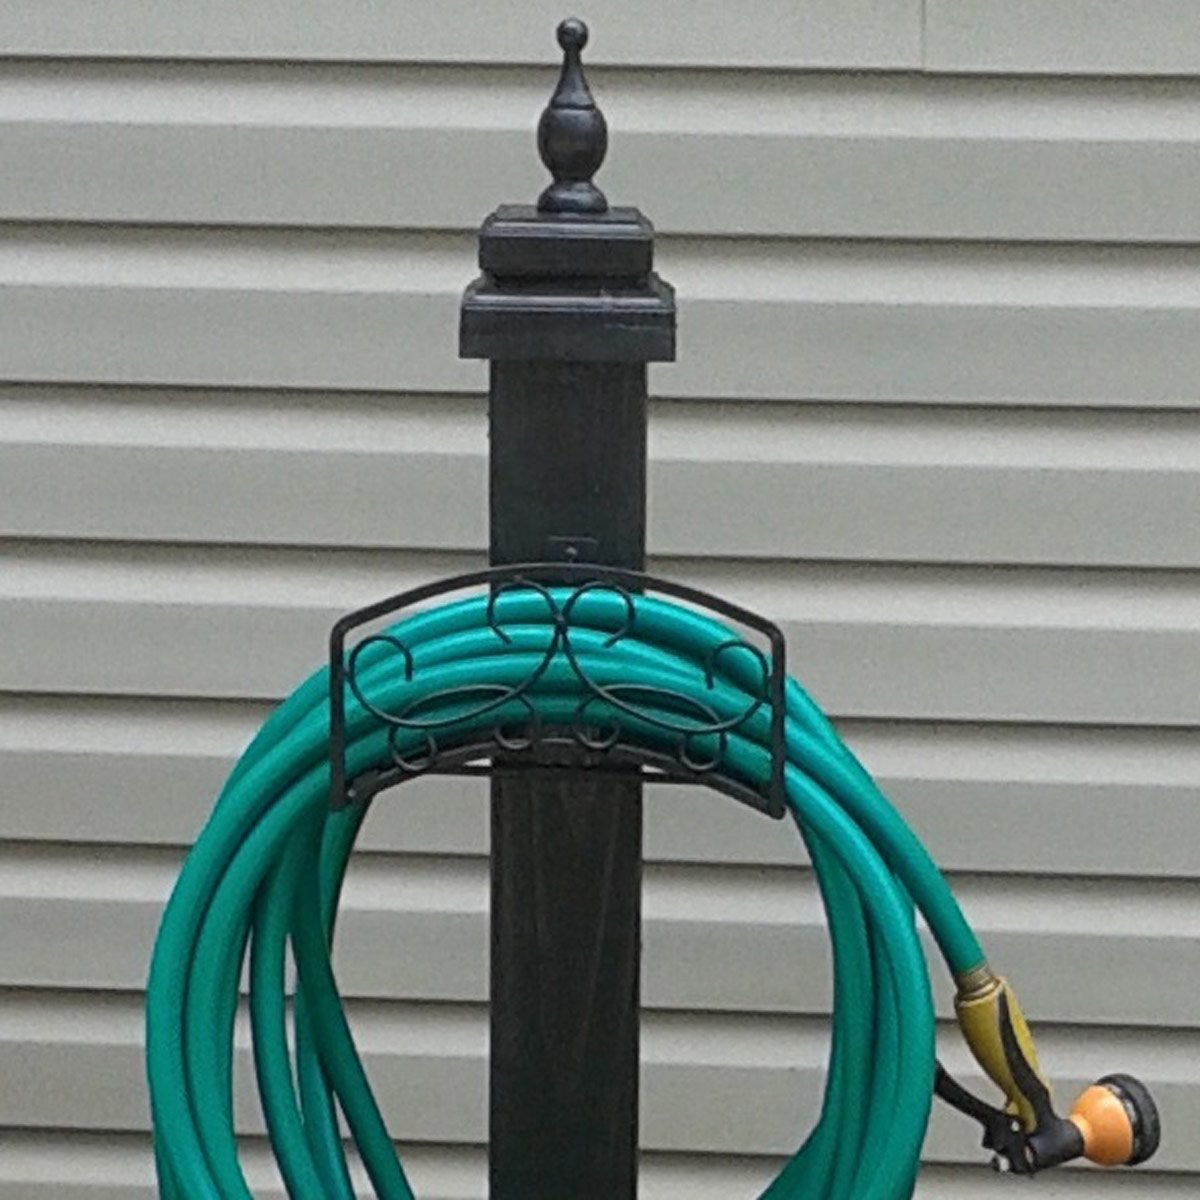 How To Make Your Own Holder Garden Hose Storage Family Handyman